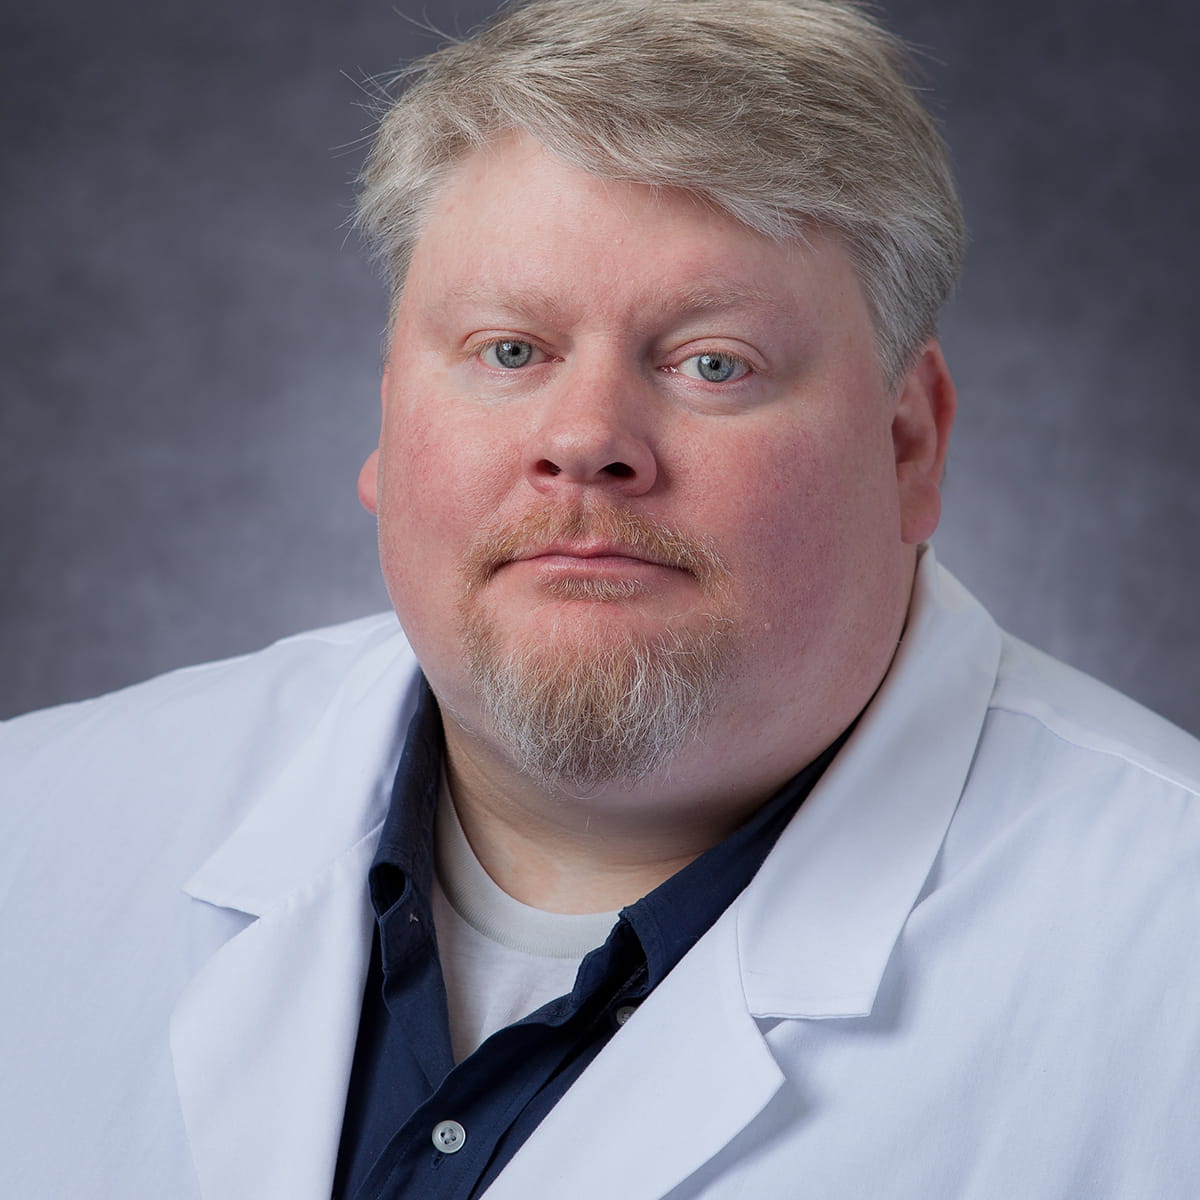 A friendly headshot of Christopher Jimmerson, MD